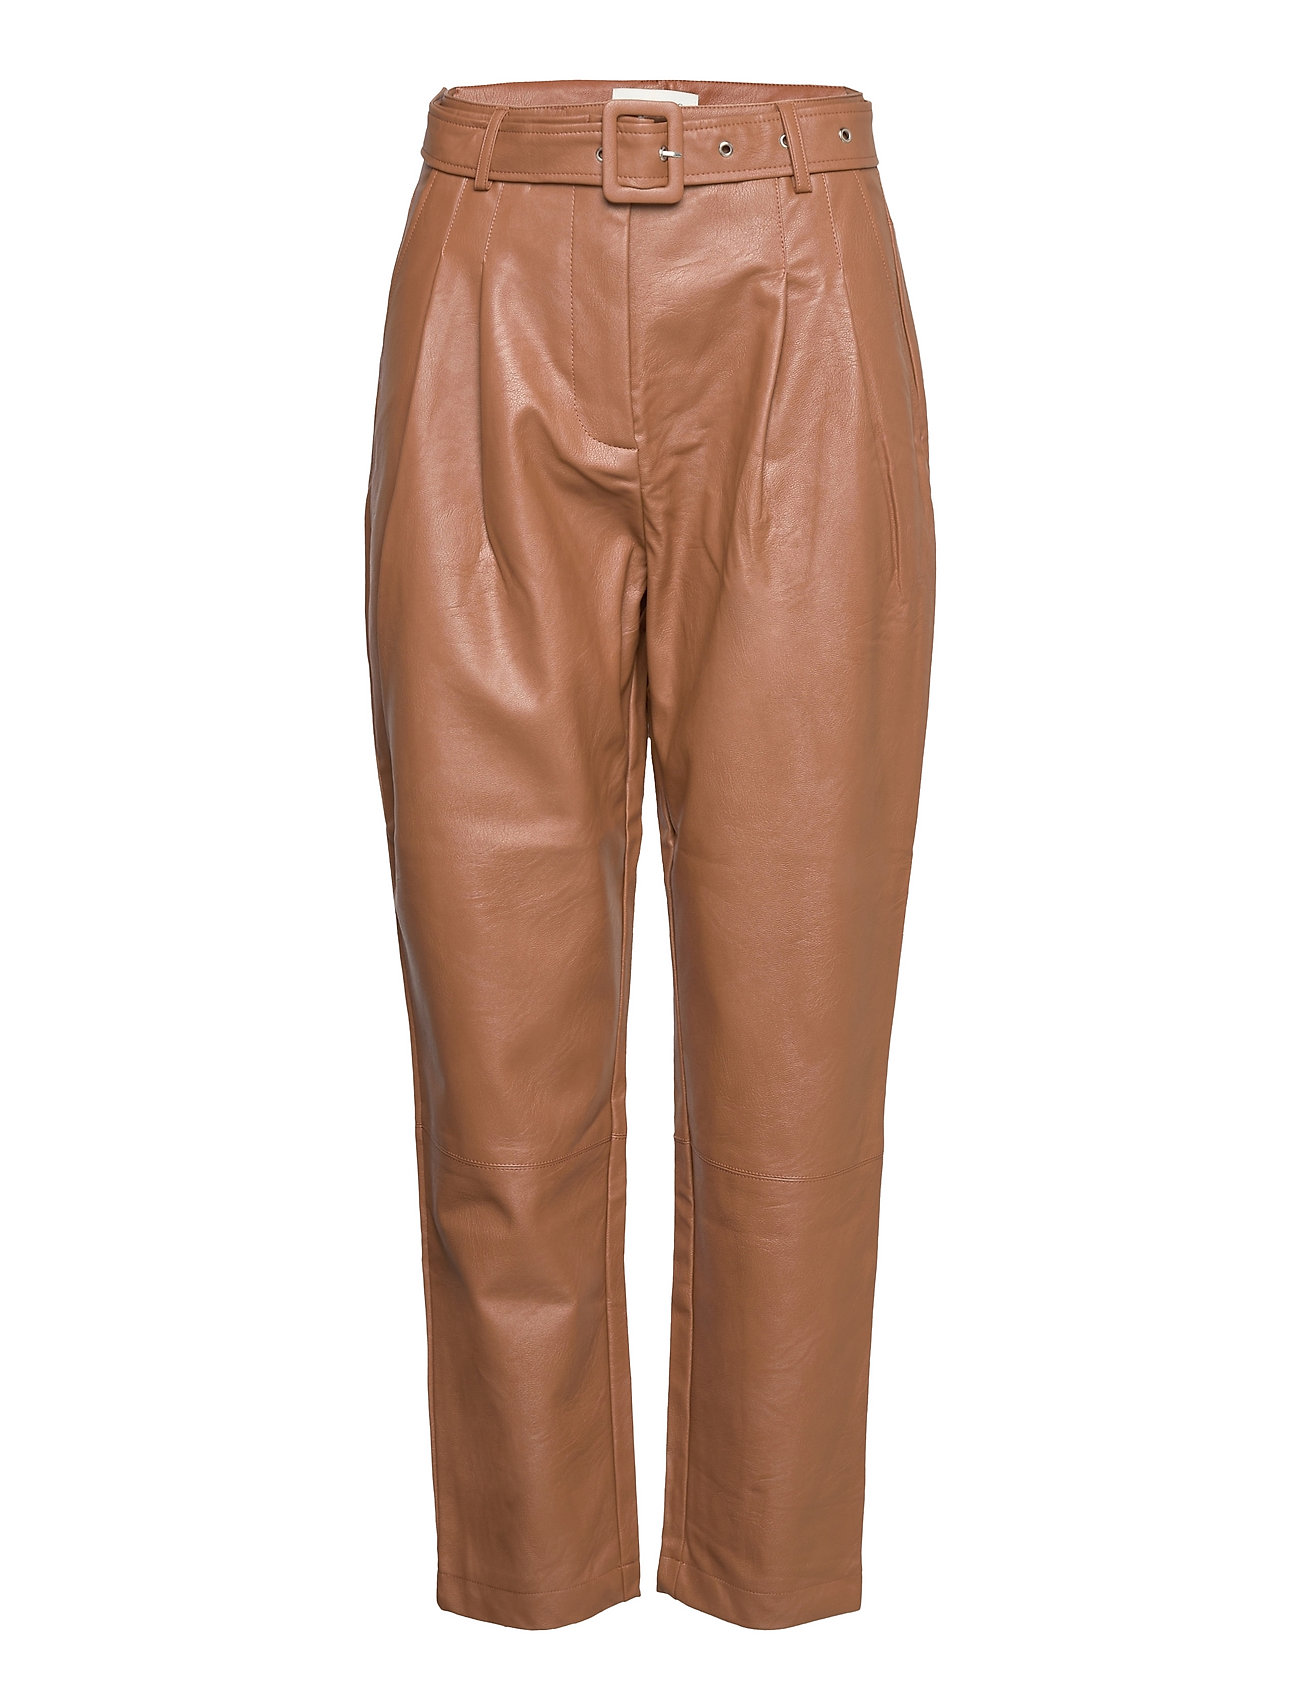 Petite brown printed faux leather trousers  River Island